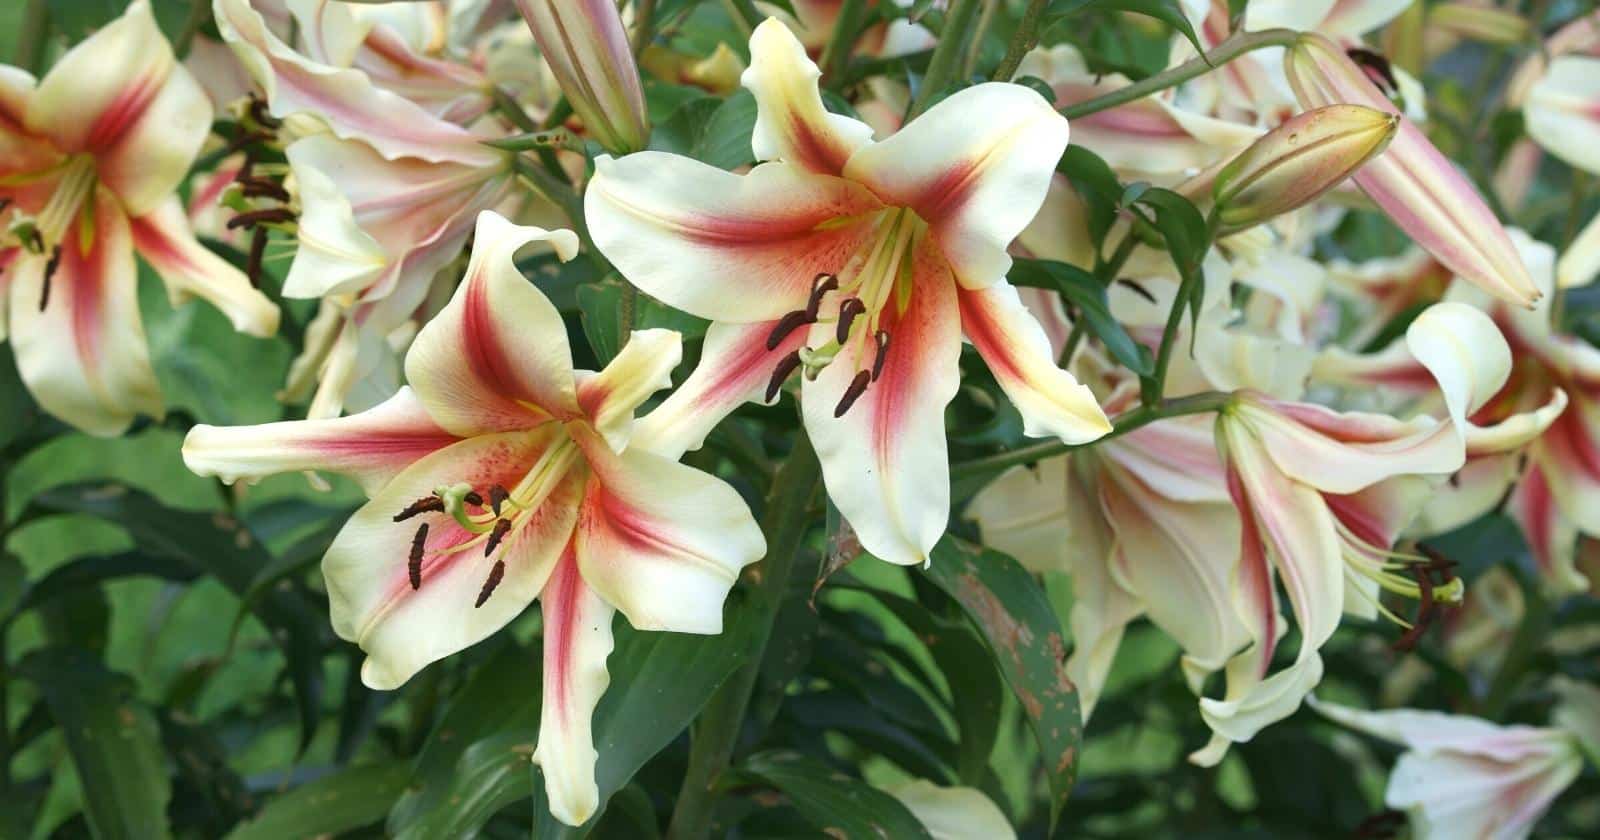 Giant star shaped flowers with six pointed petals and long stamen with brown tops. Each petal is off white with a reddish orange stripe down the middle.